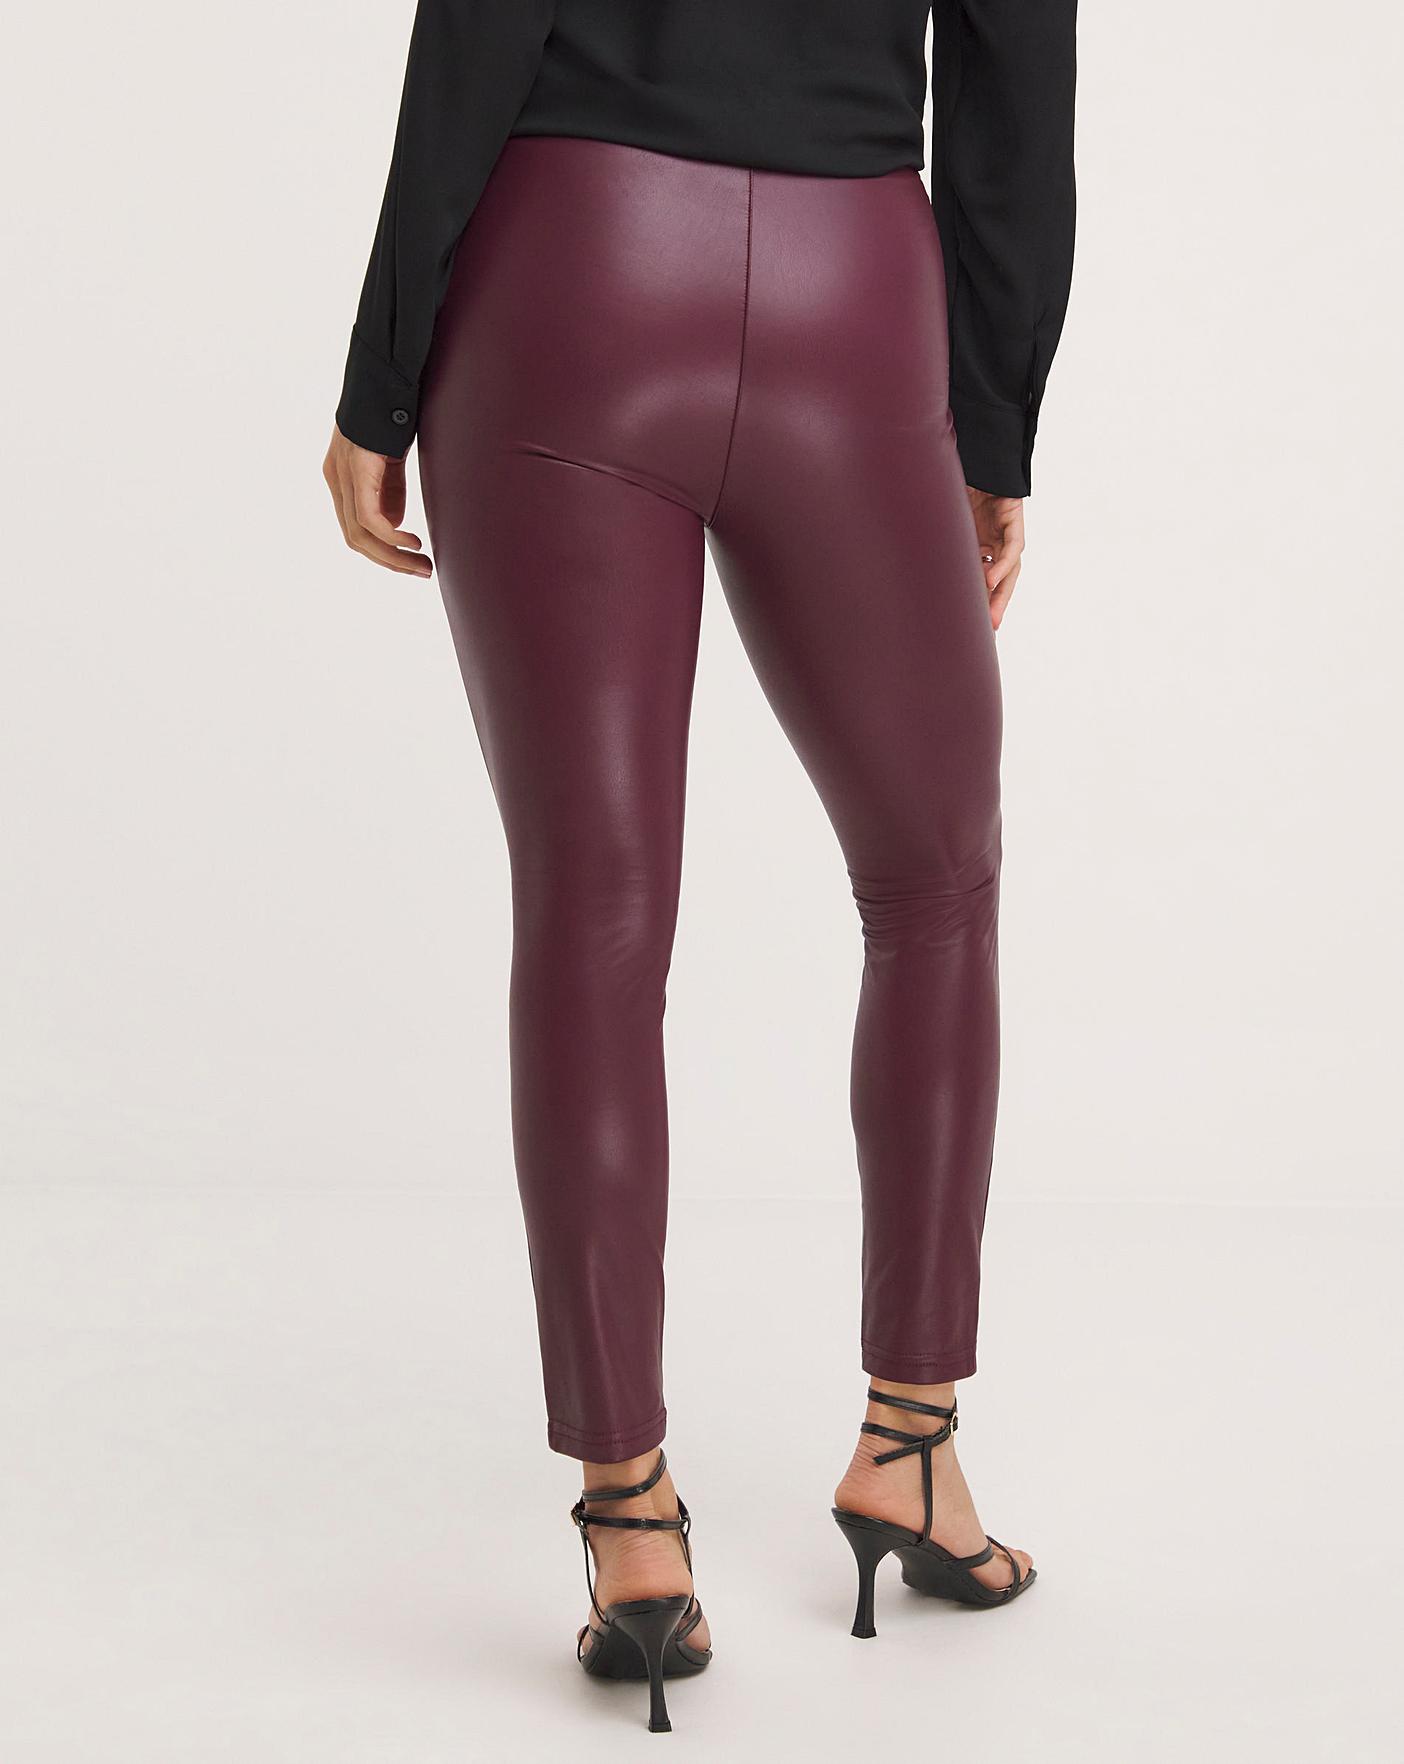 Dennis Basso Faux Leather Pull-On Ankle Leggings - QVC.com